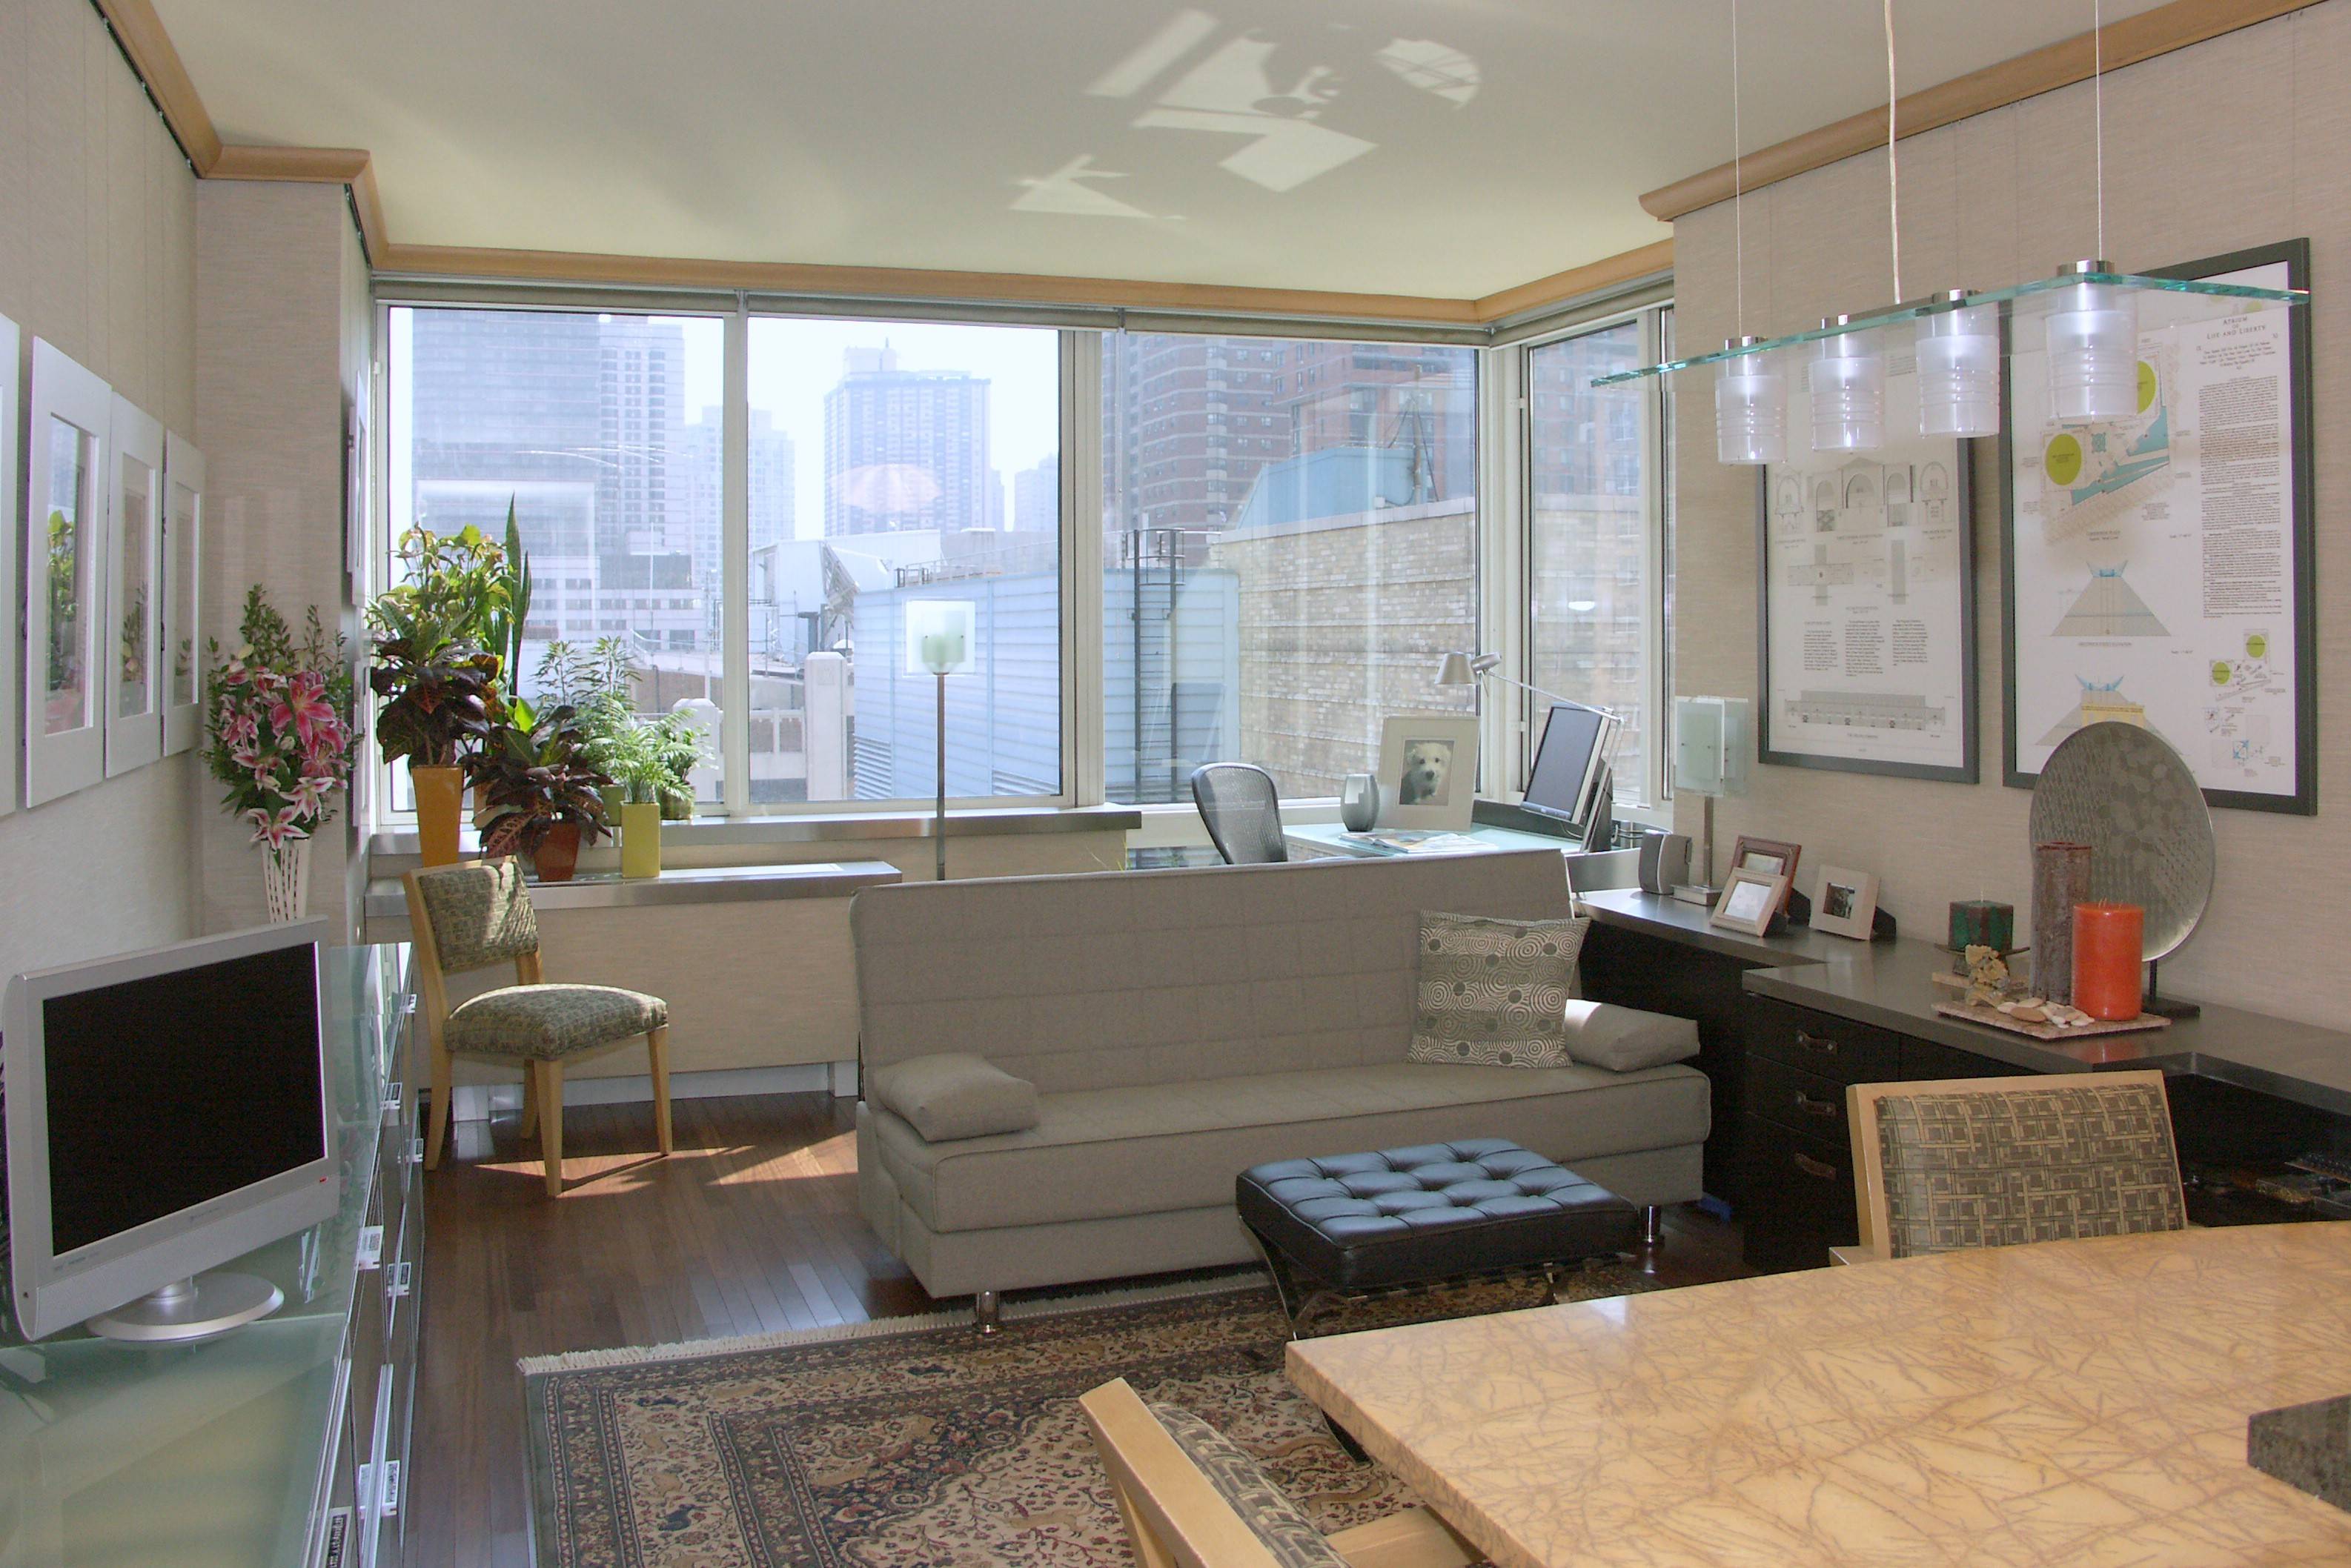 Mint Condition Studio Condo For Sale on UWS - Near Lincoln Center and Time Warner Shopping!